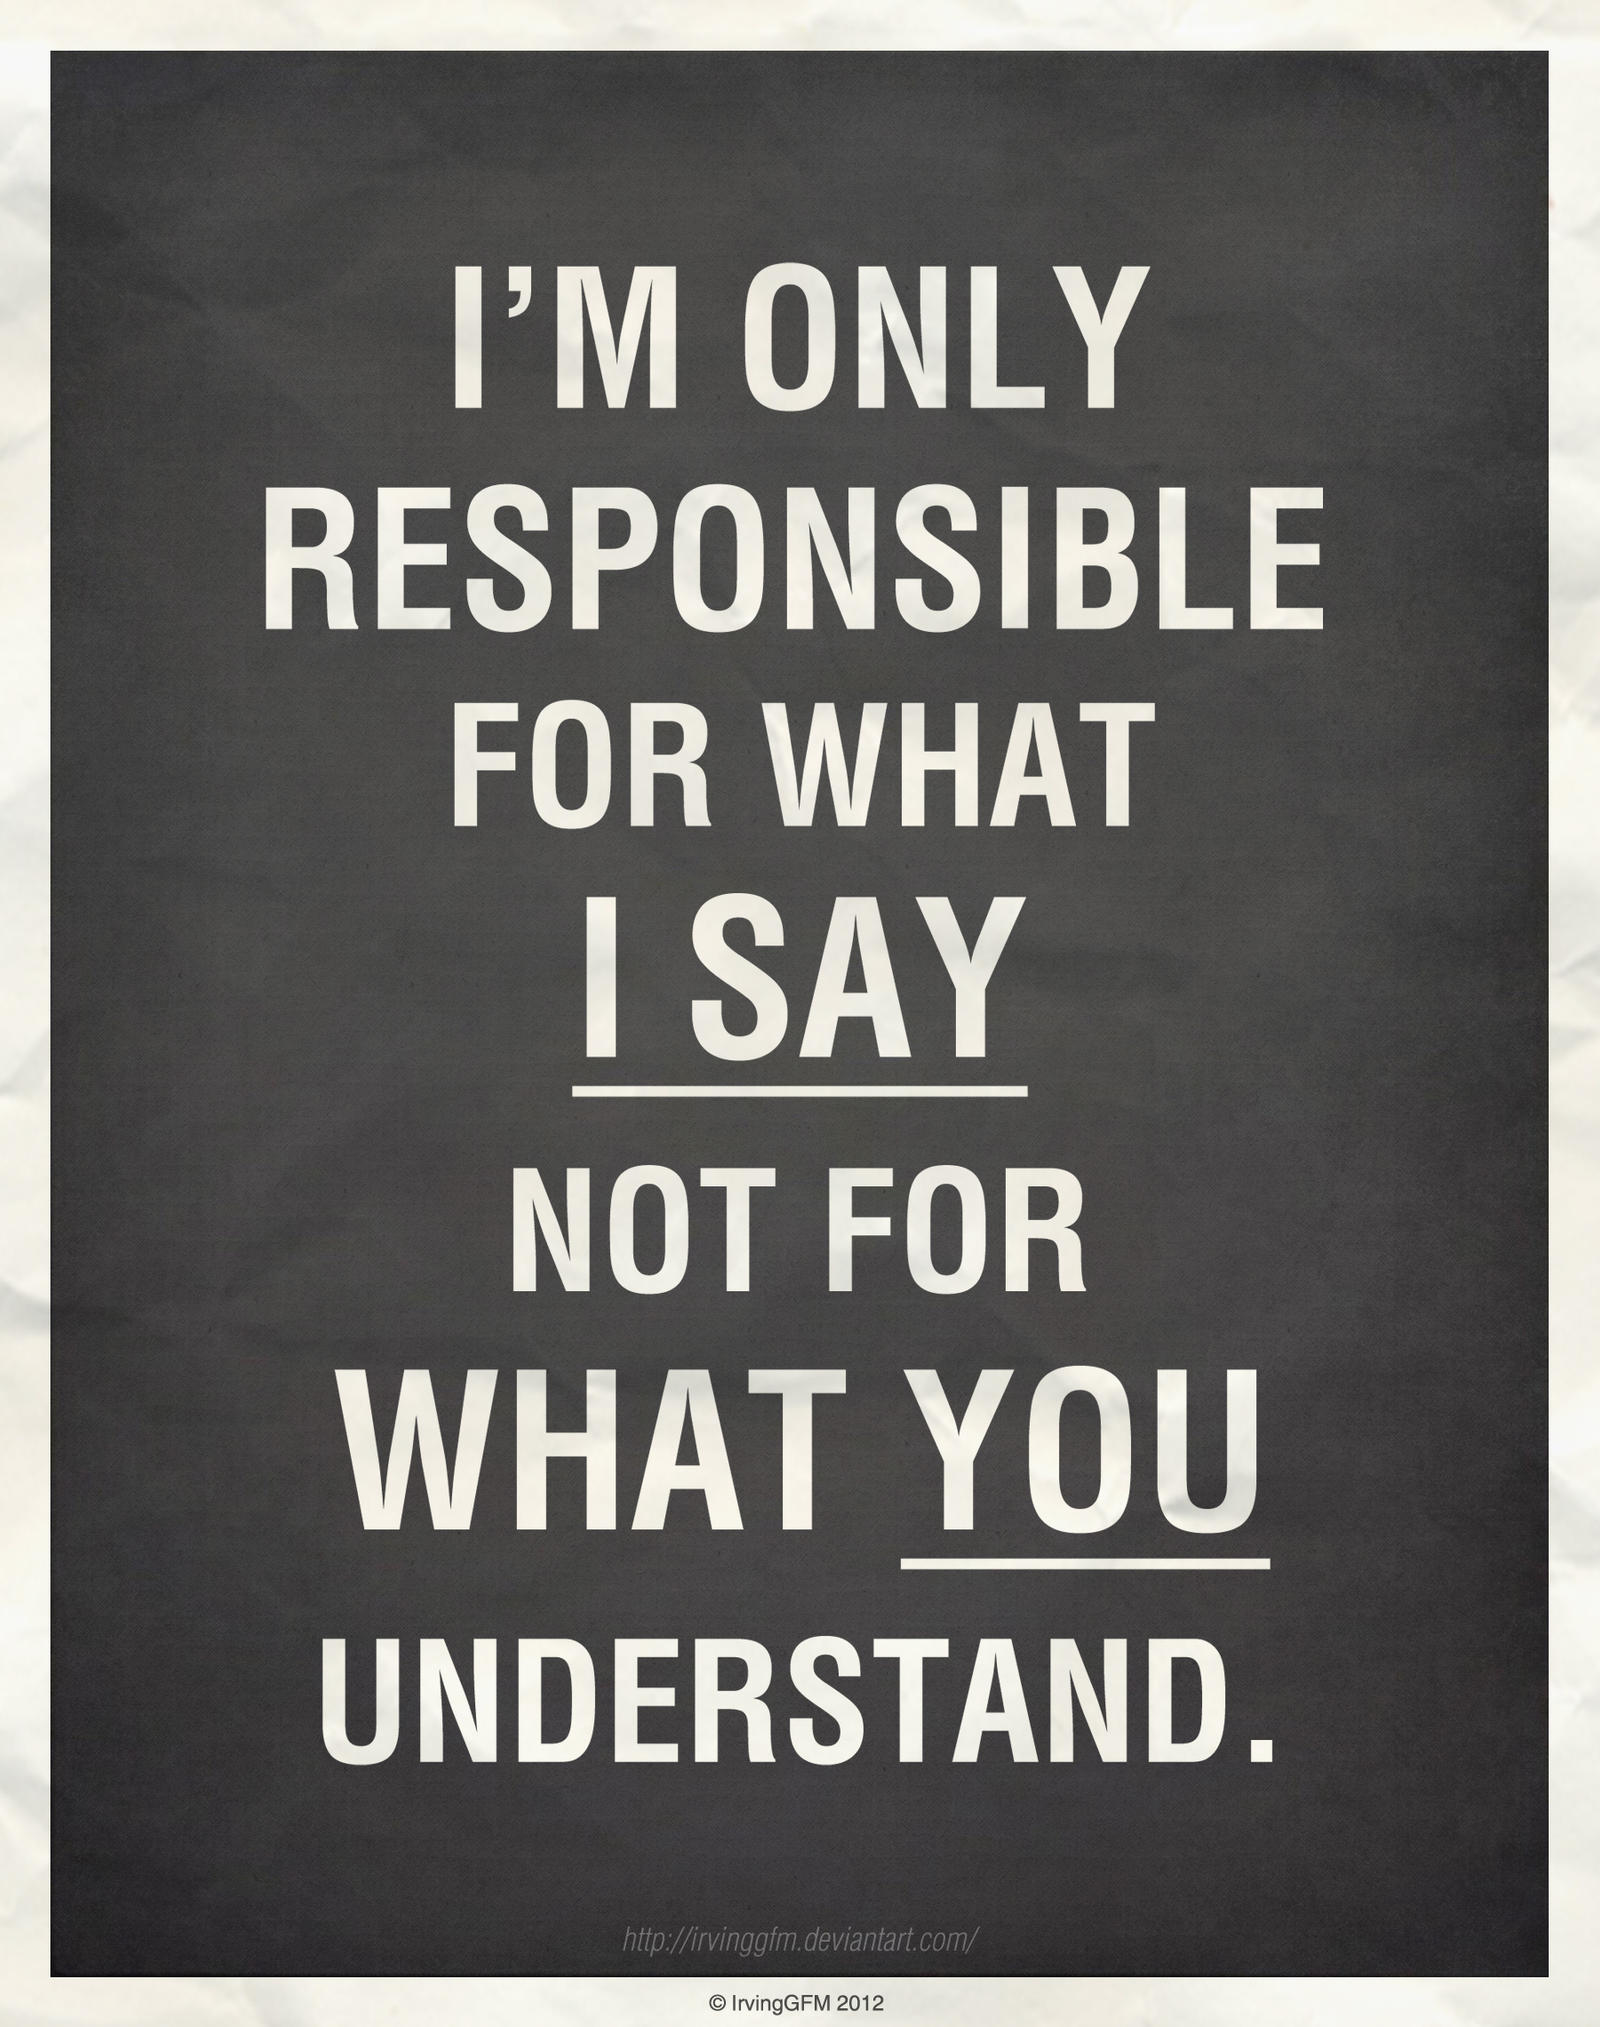 I'm Only Responsible for...